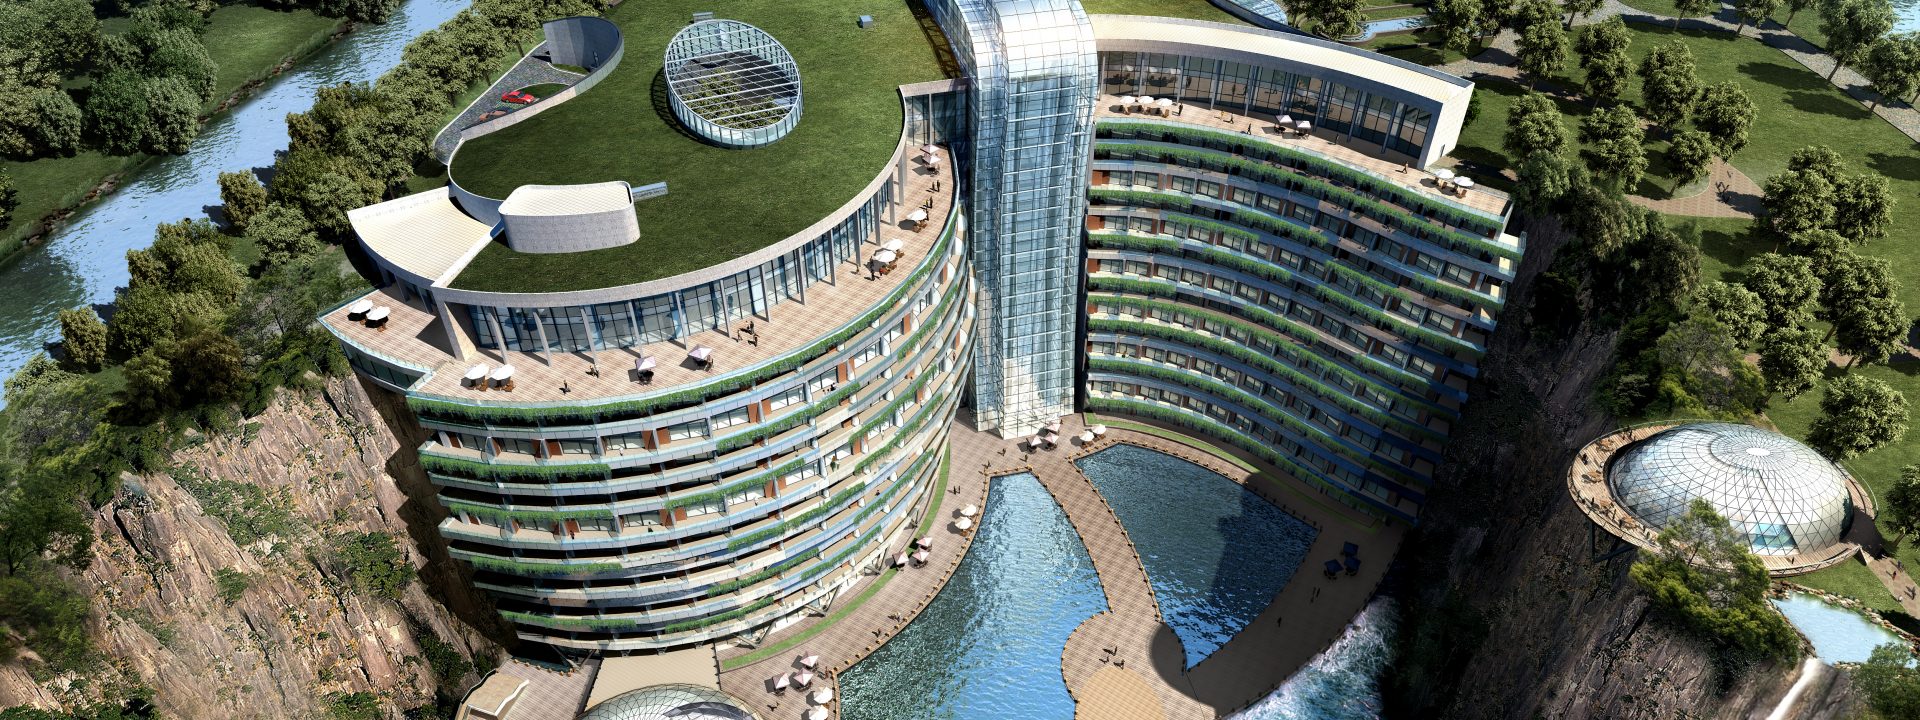 InterContinental is opening a hotel in Shanghai that is underground and underwater